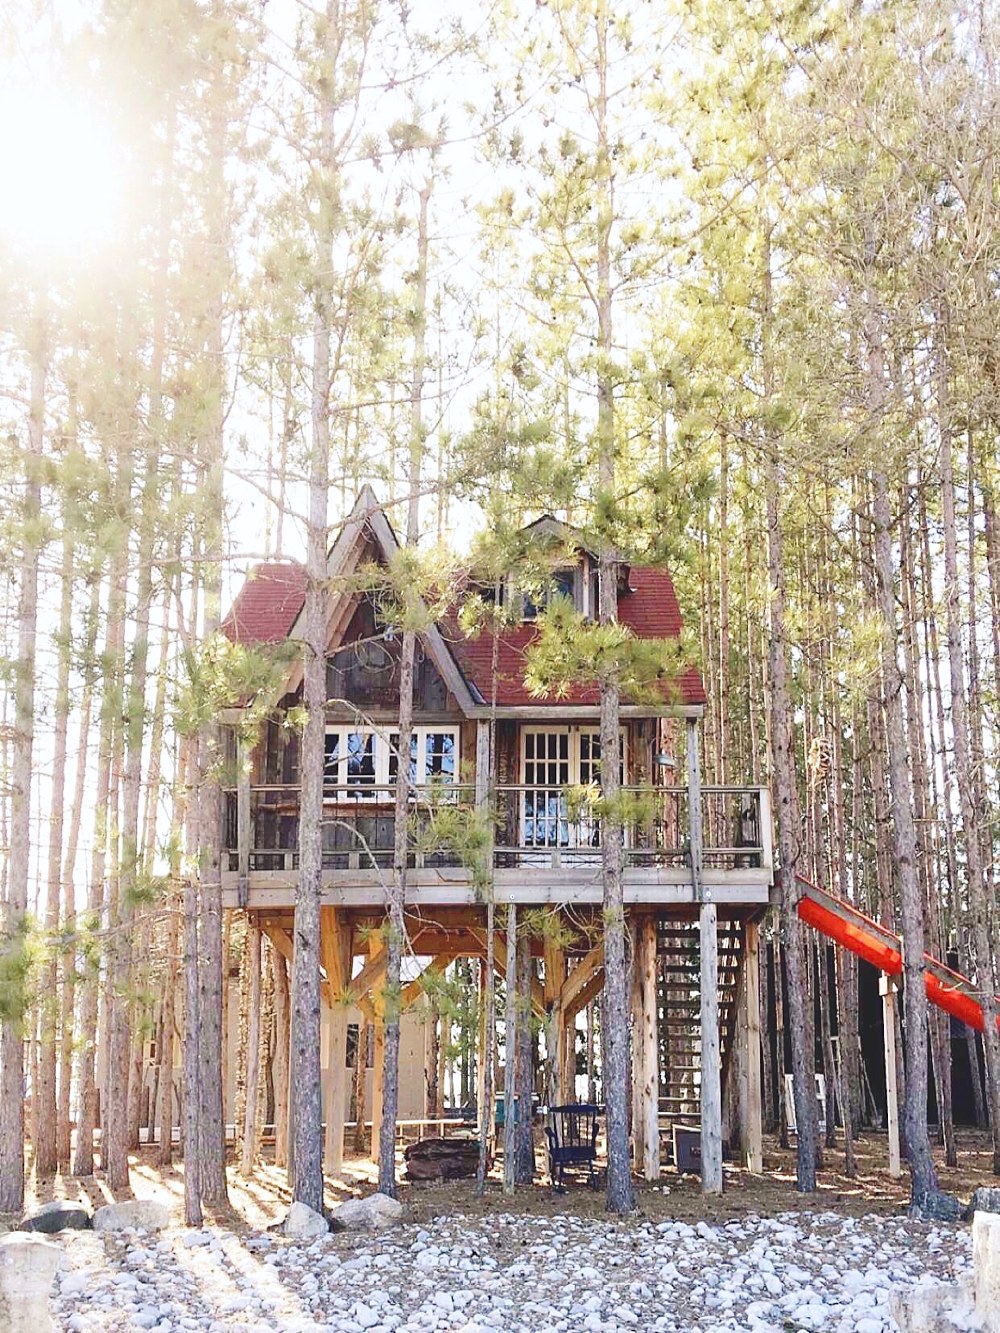 Experience sleeping in a #treehouse ! Ranked one of the top treehouses in the world! www.lynneknowlton.com